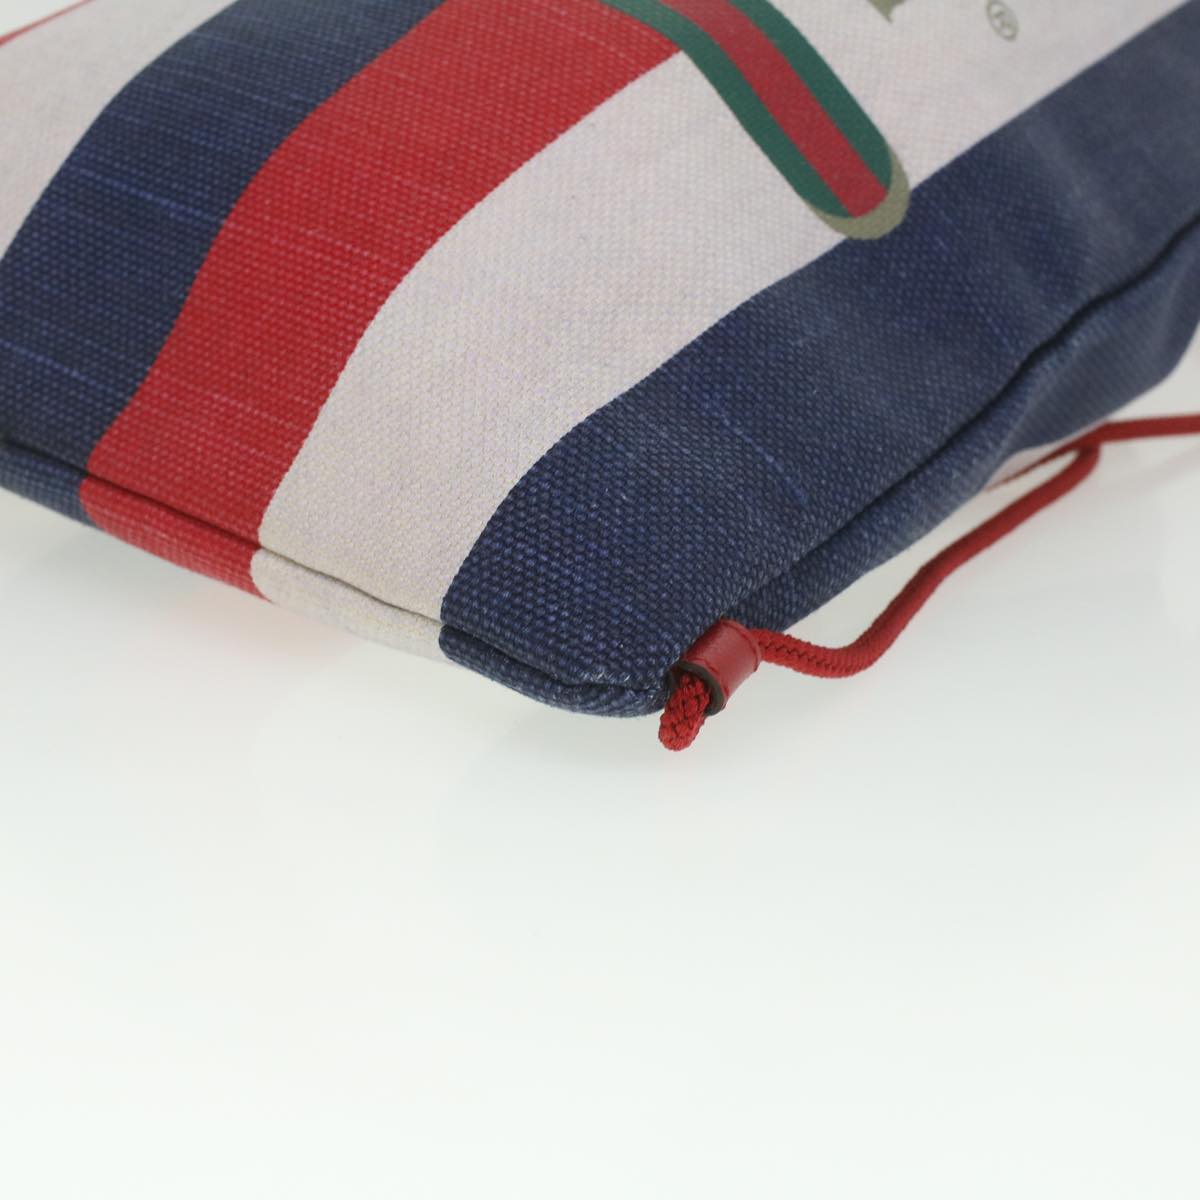 GUCCI Web Sherry Line Backpack Canvas Tricolor Red Blue Green 473872 Auth am3970